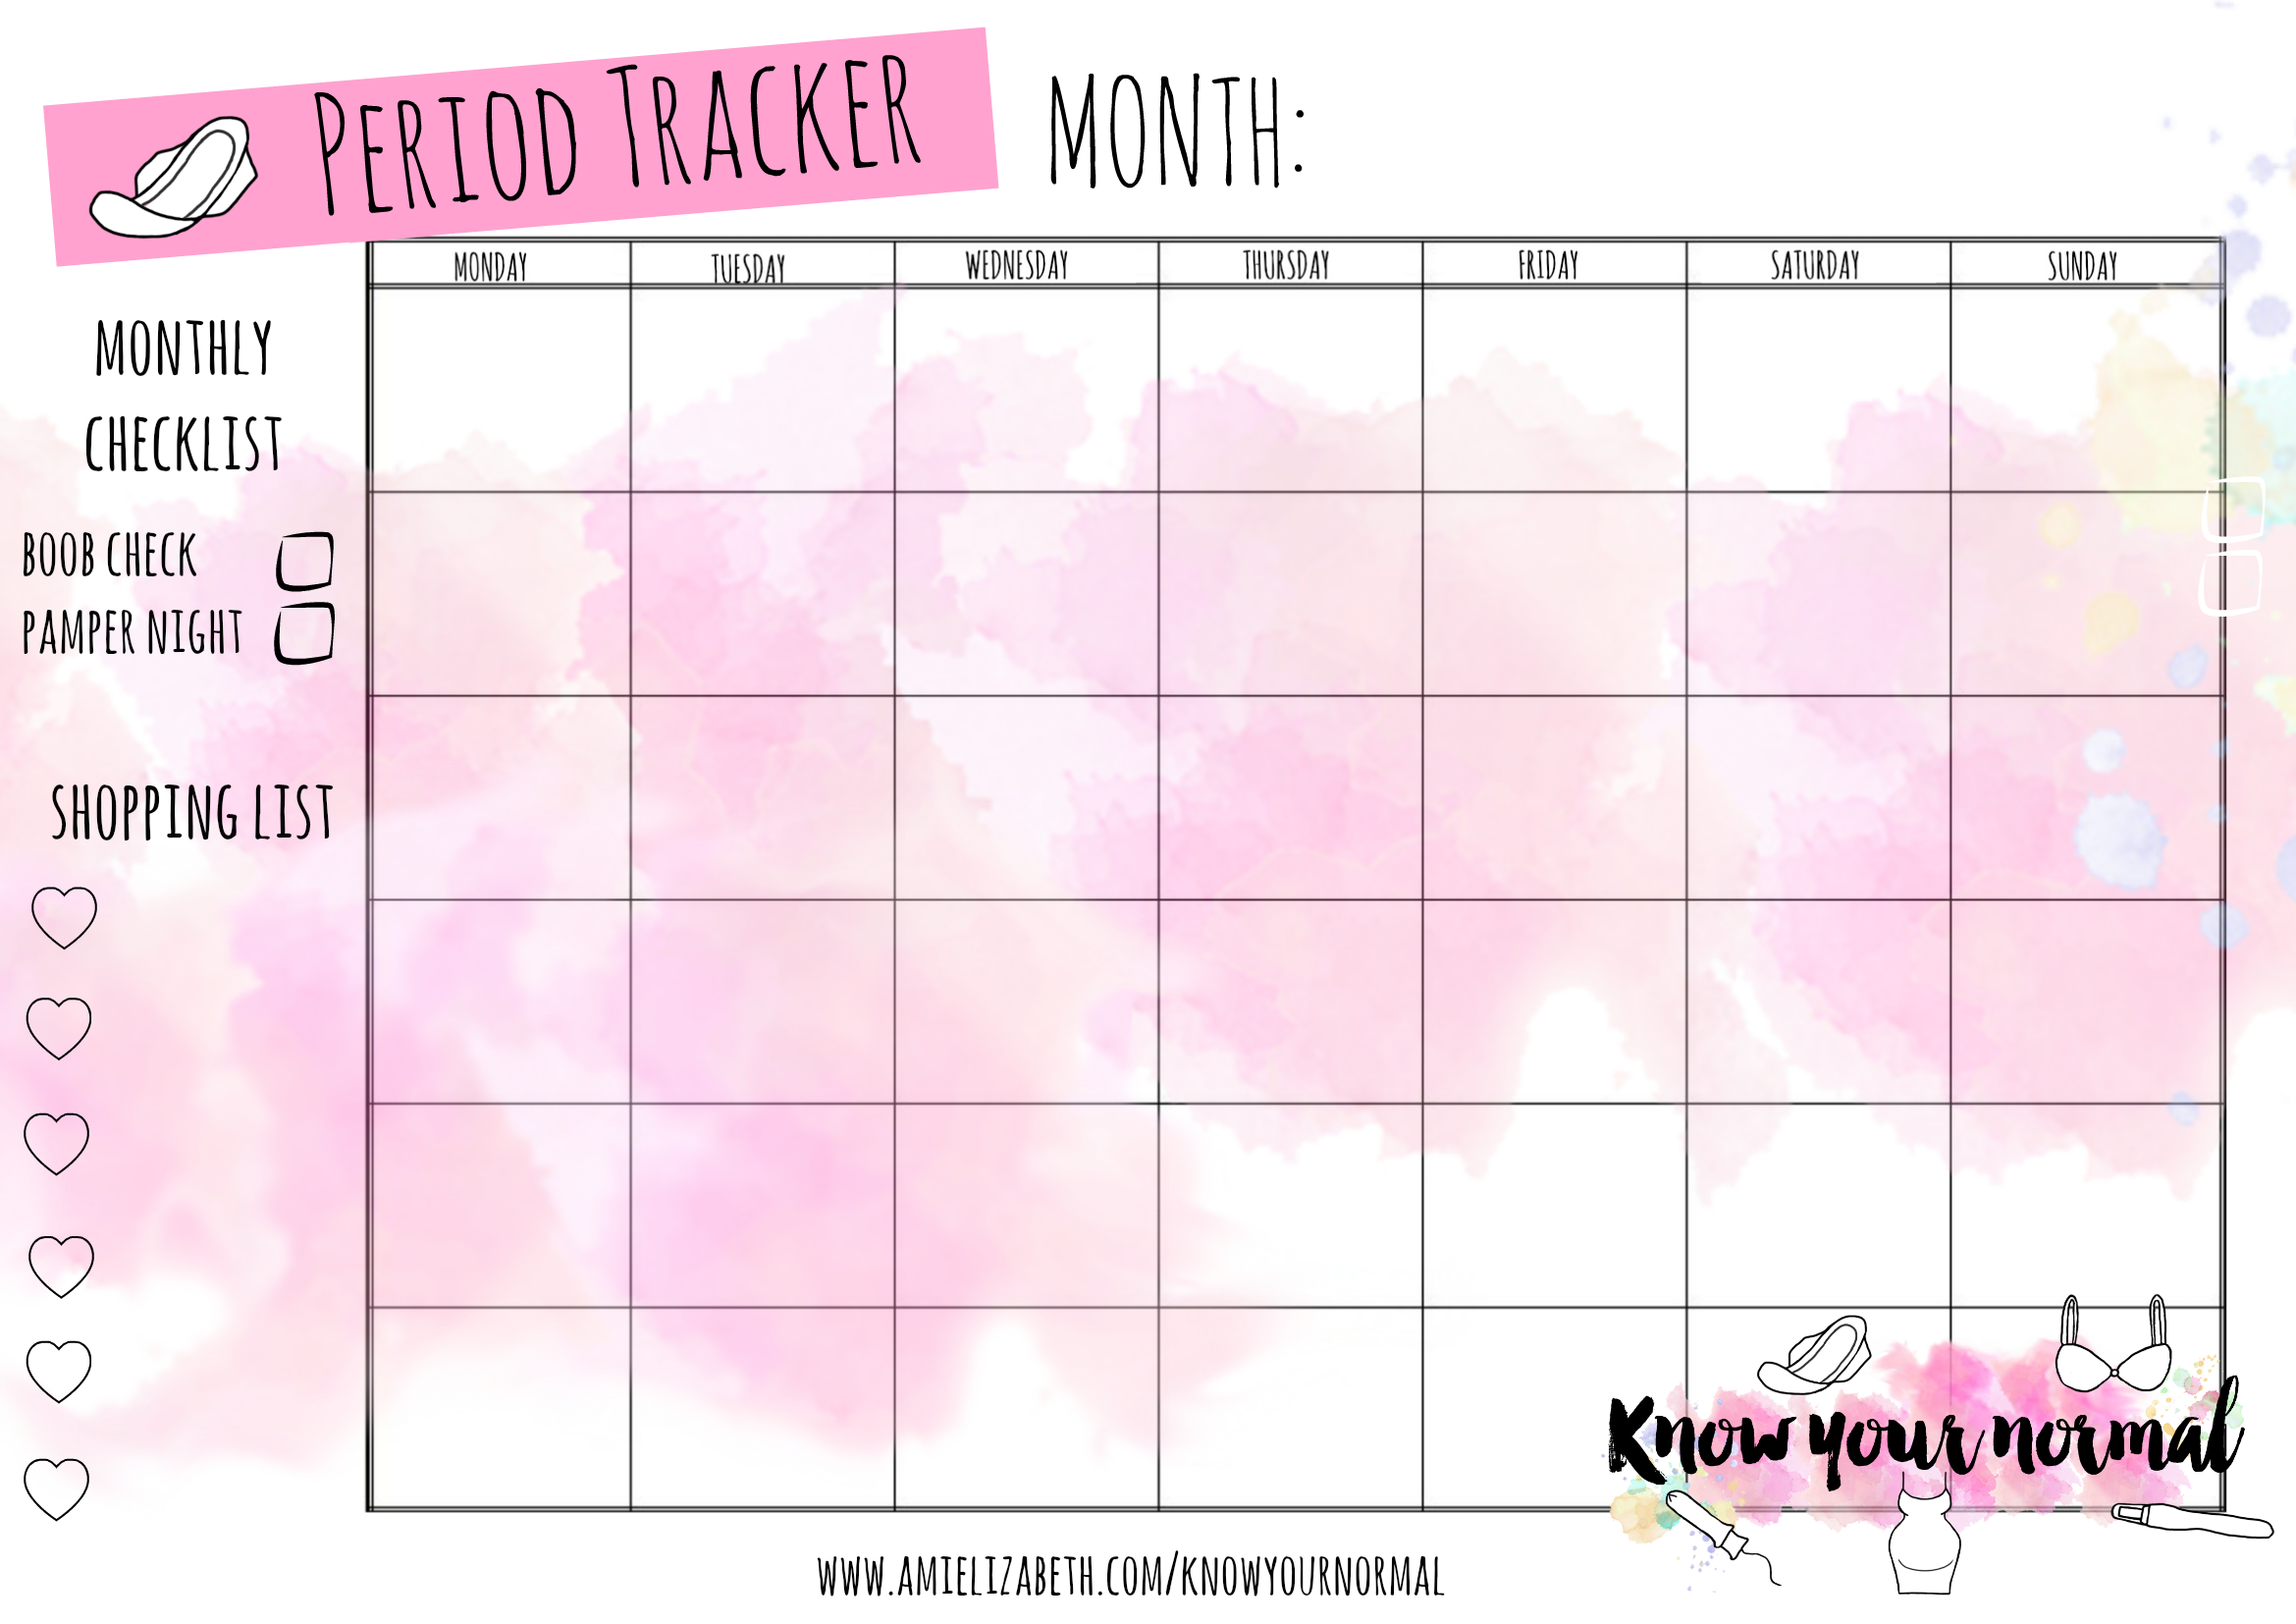 FREE PRINTABLE* #KnowYourNormal Period Tracker. Record your 